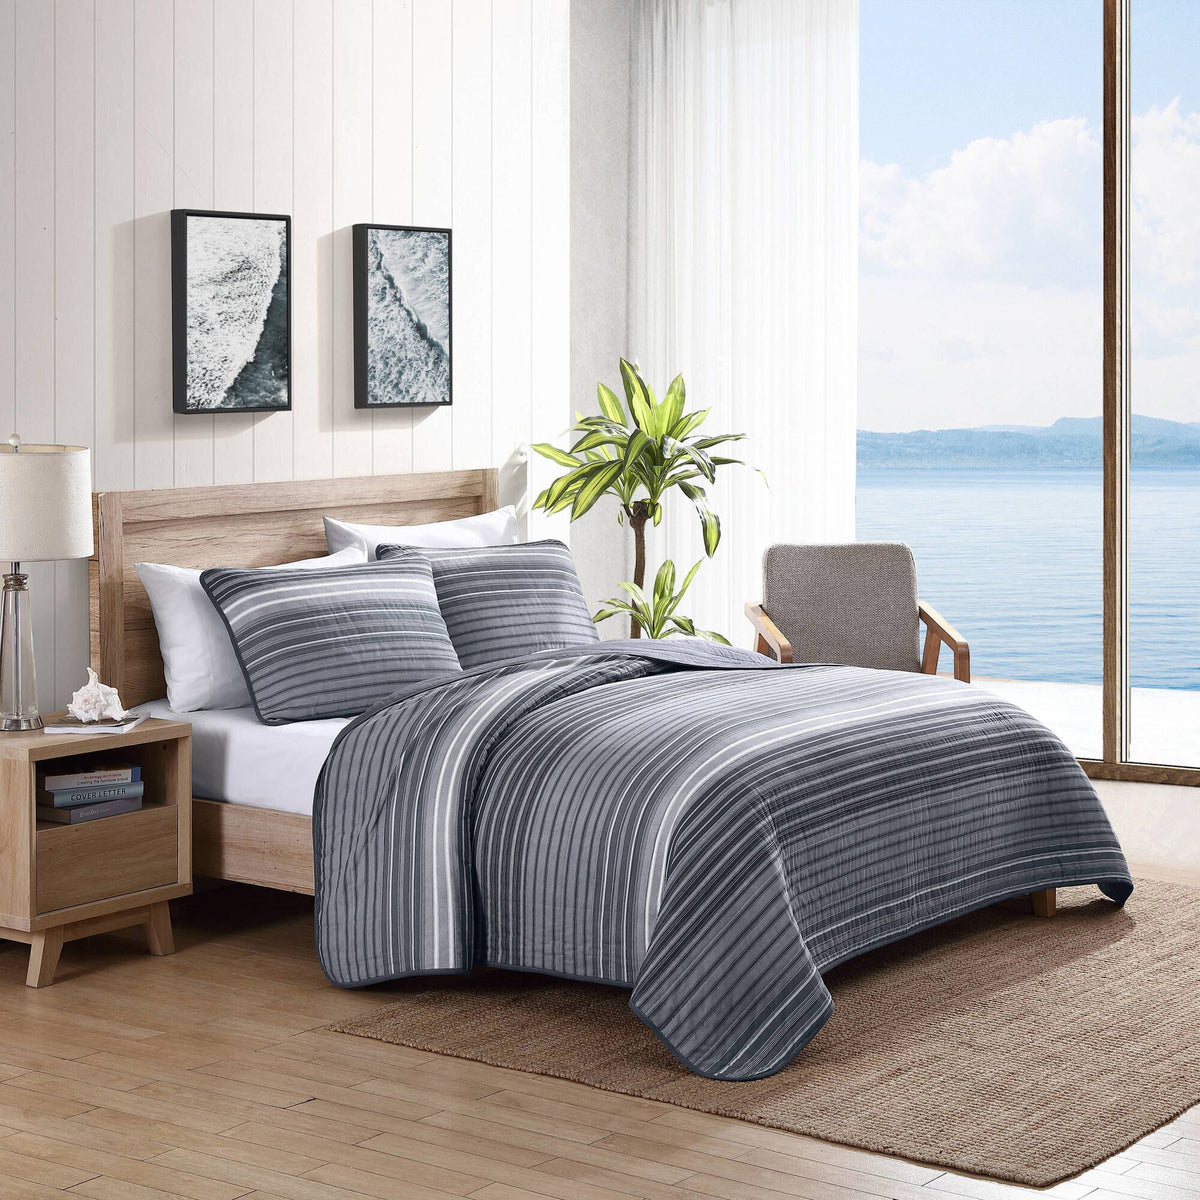 Nautica Coveside Twin Reversible Quilt And Sham Set Heather